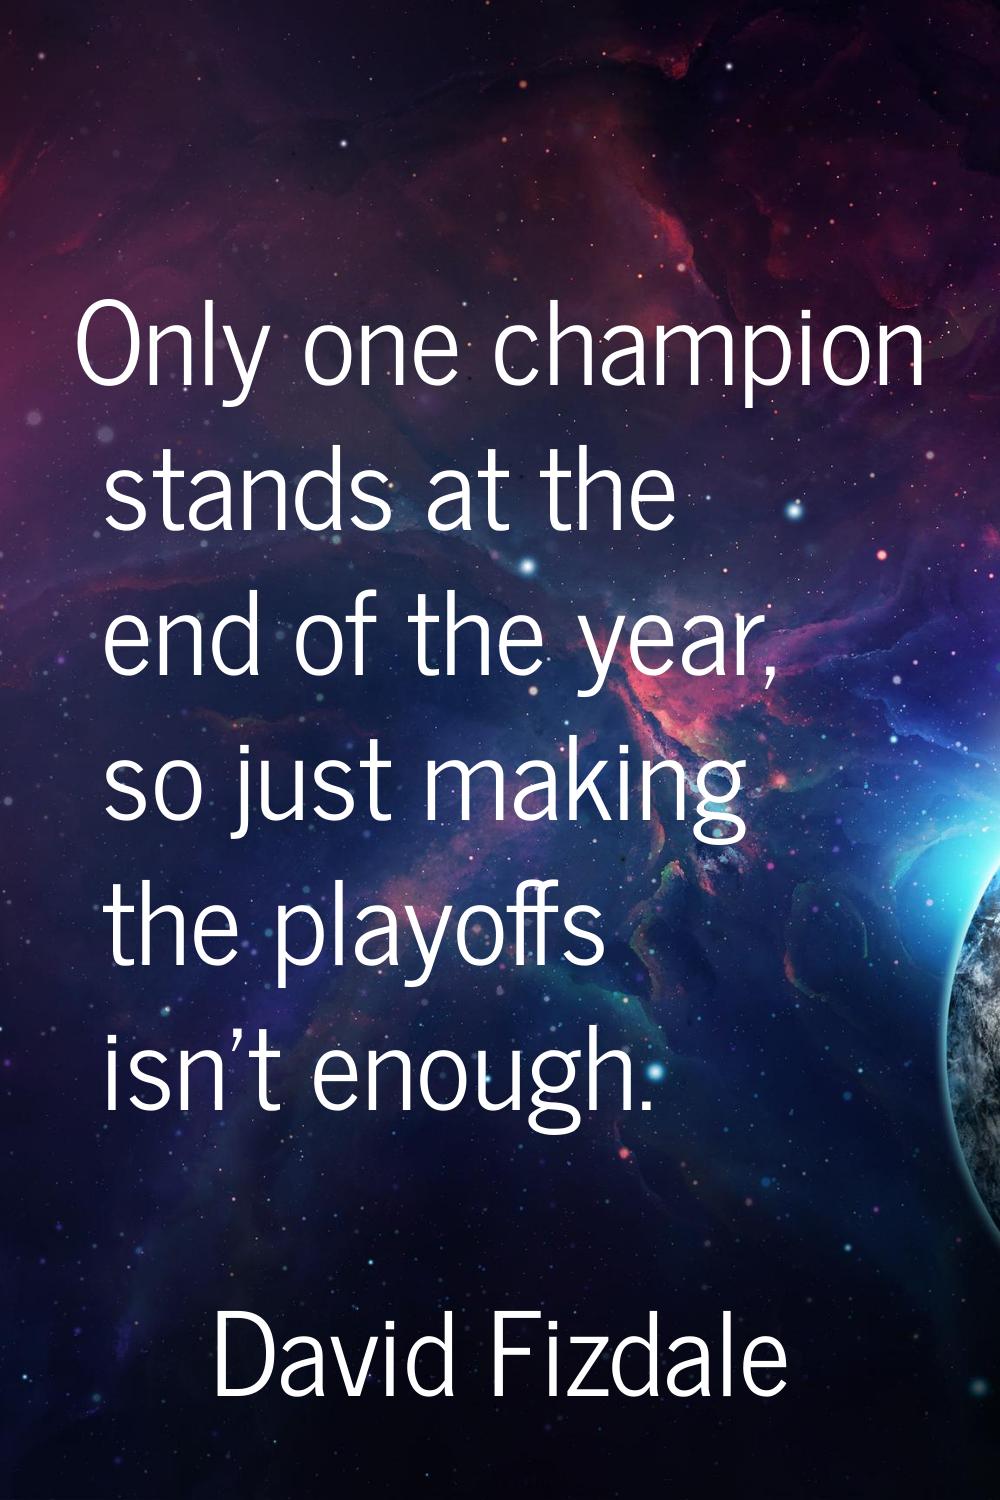 Only one champion stands at the end of the year, so just making the playoffs isn't enough.